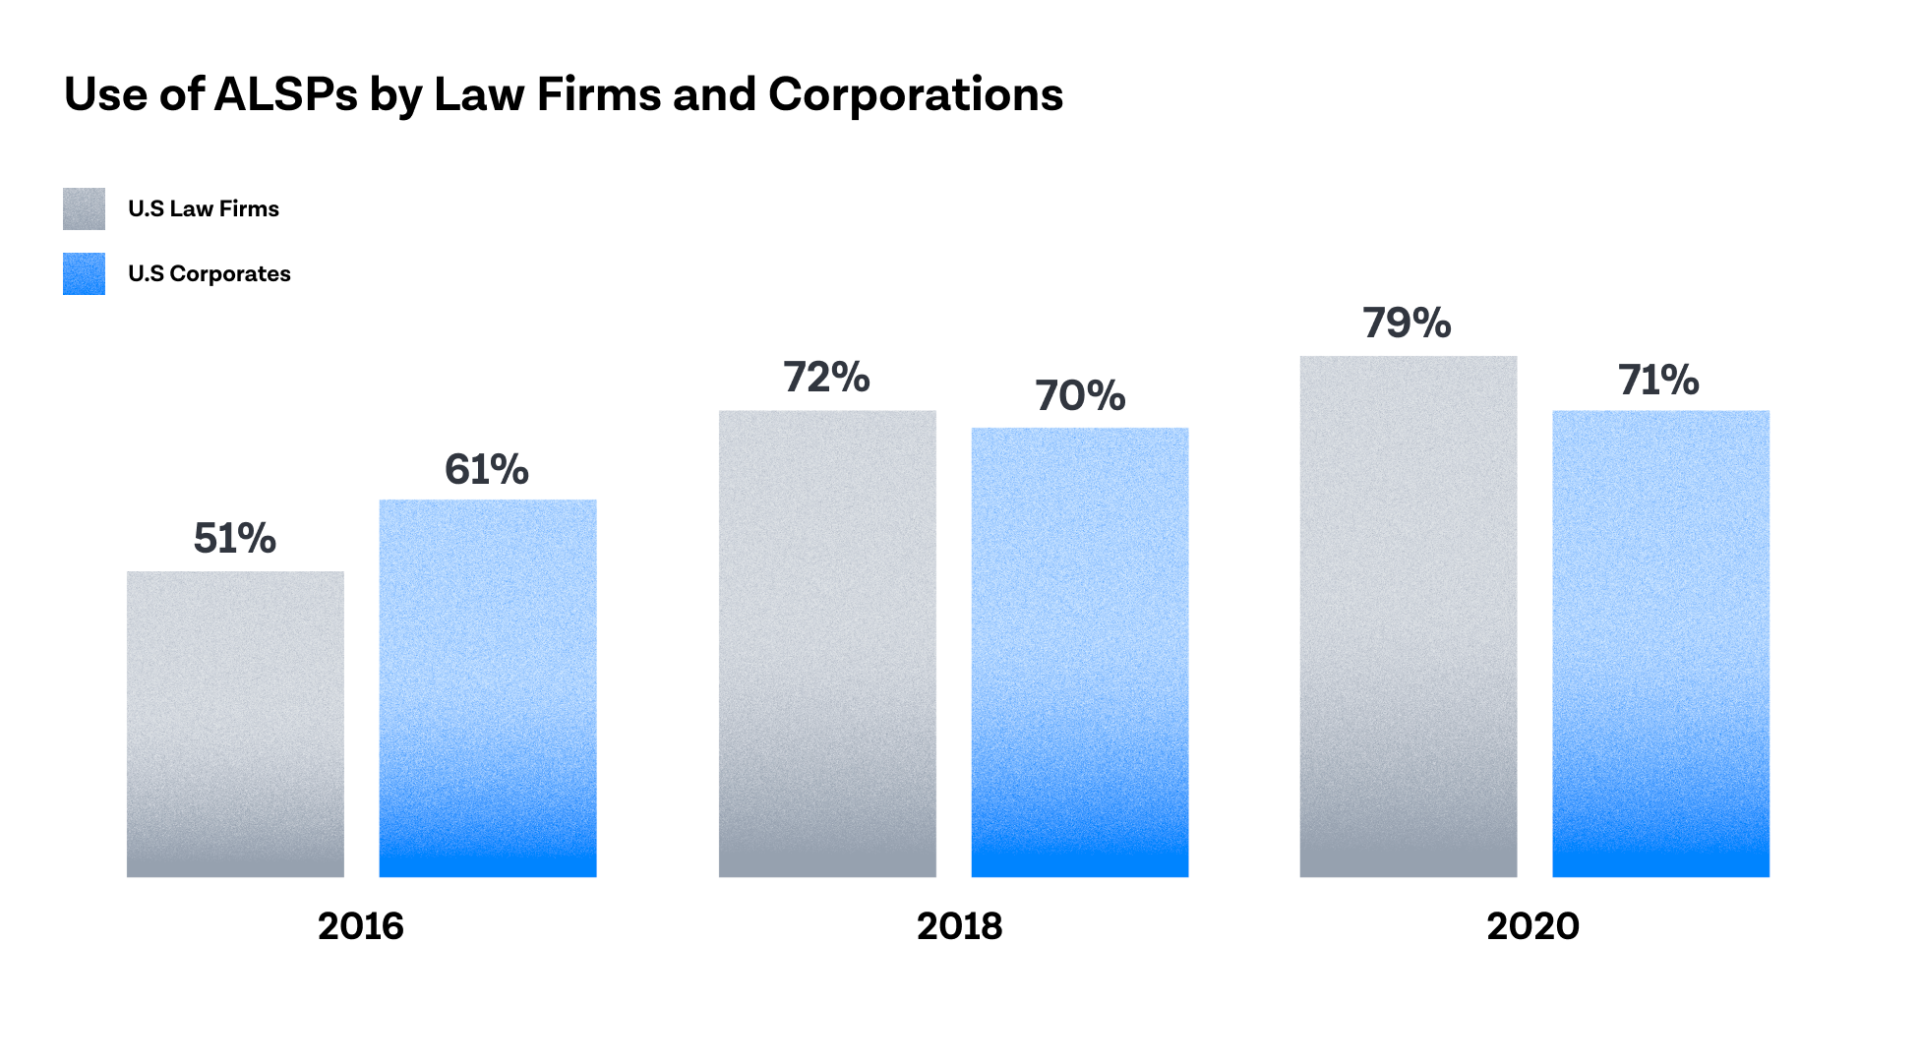 Use of ALSPs by Law Firms and Corporations